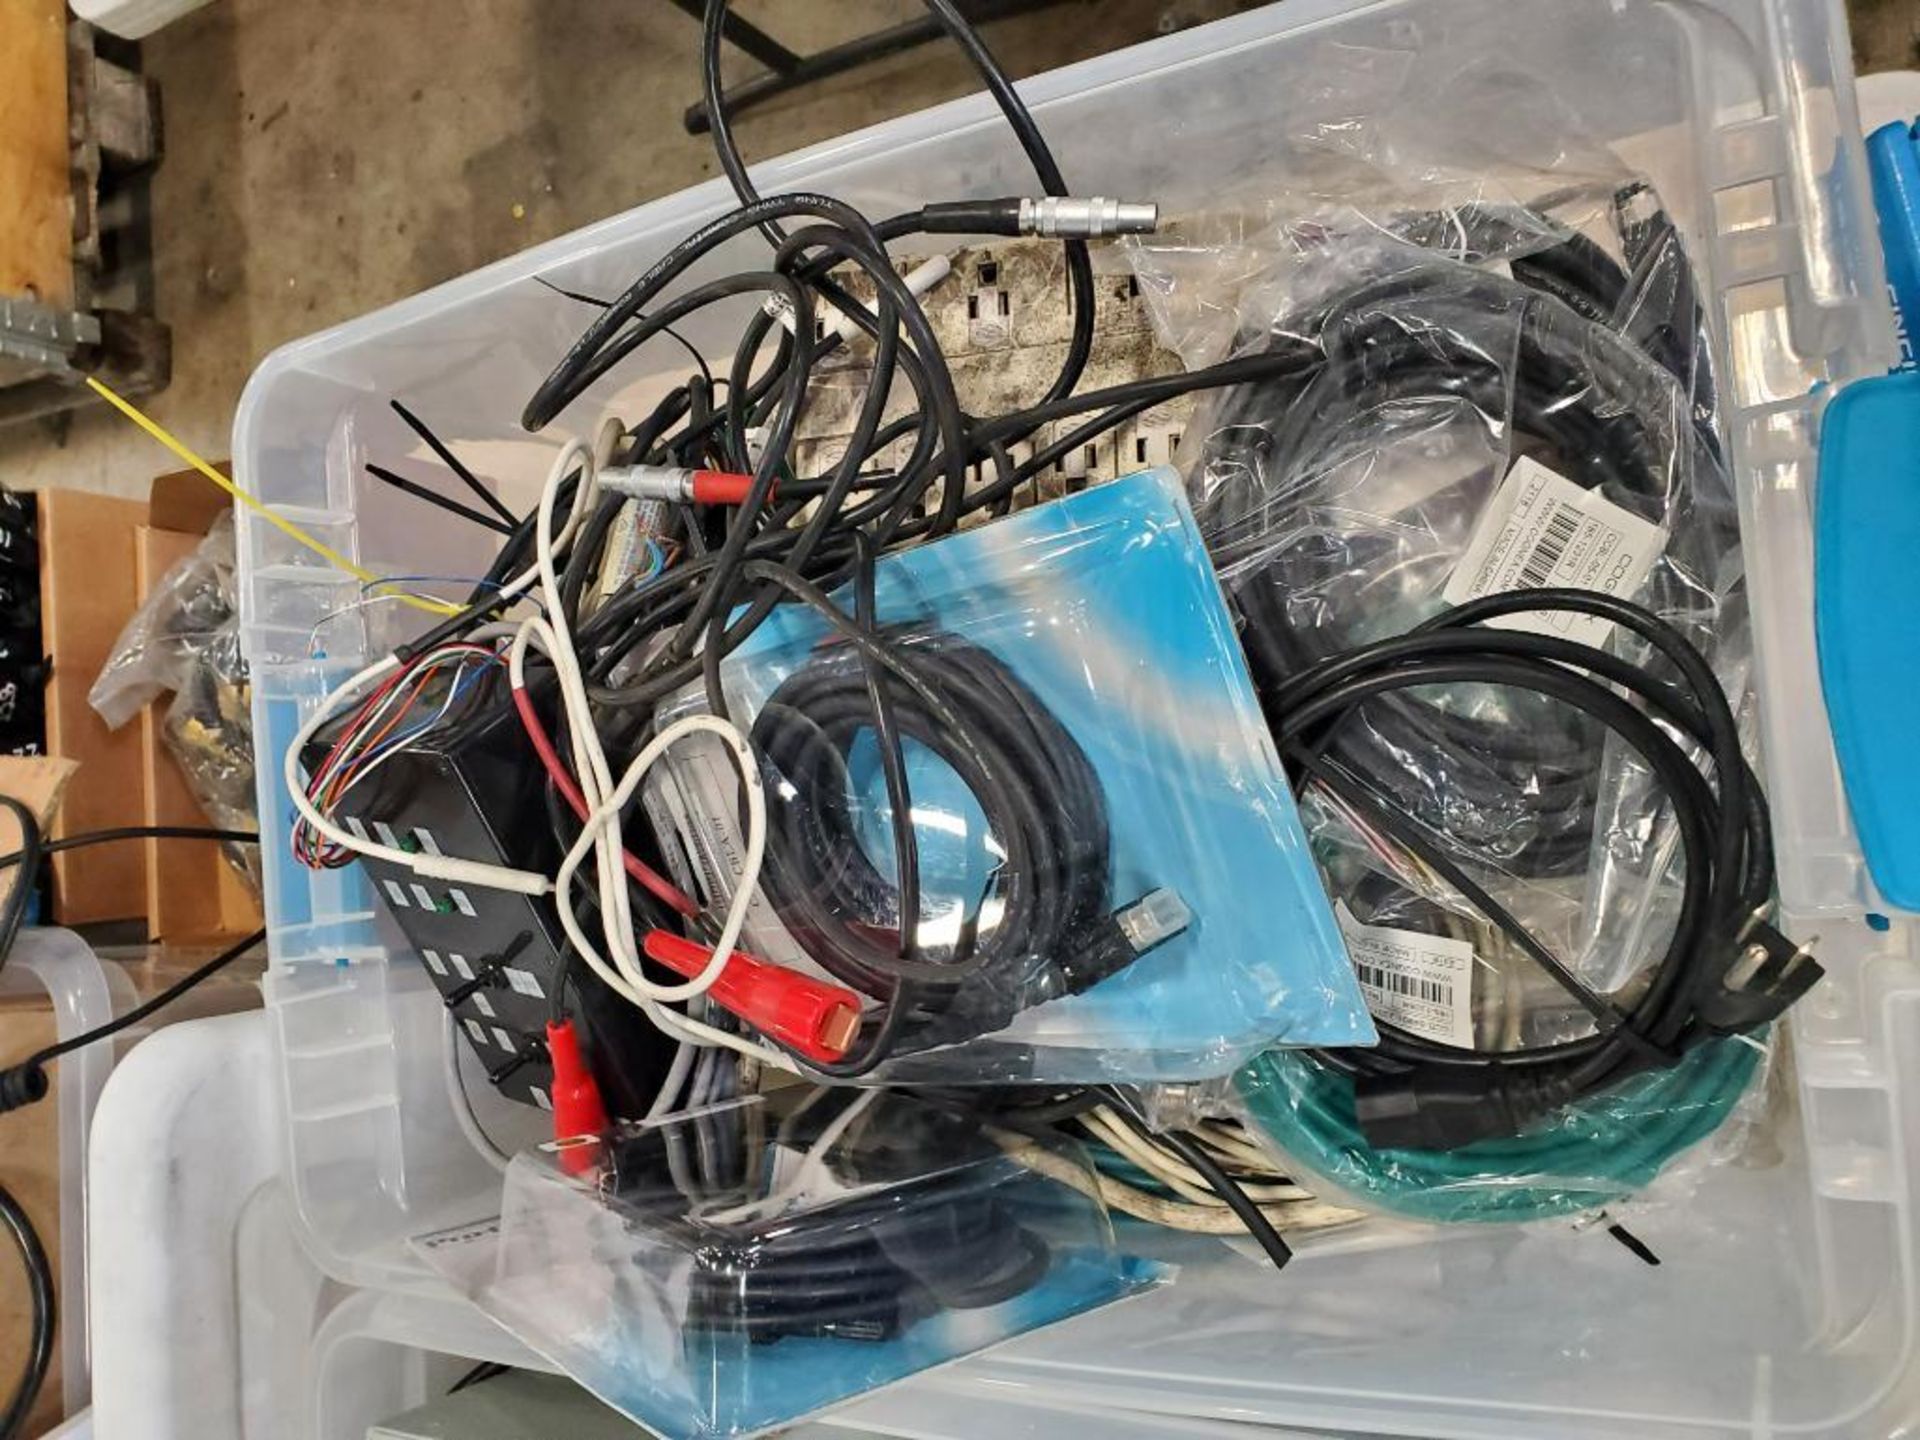 Assorted electrical power supply, cords, chargers, hand tool cutter, hand held scanners. - Image 2 of 17